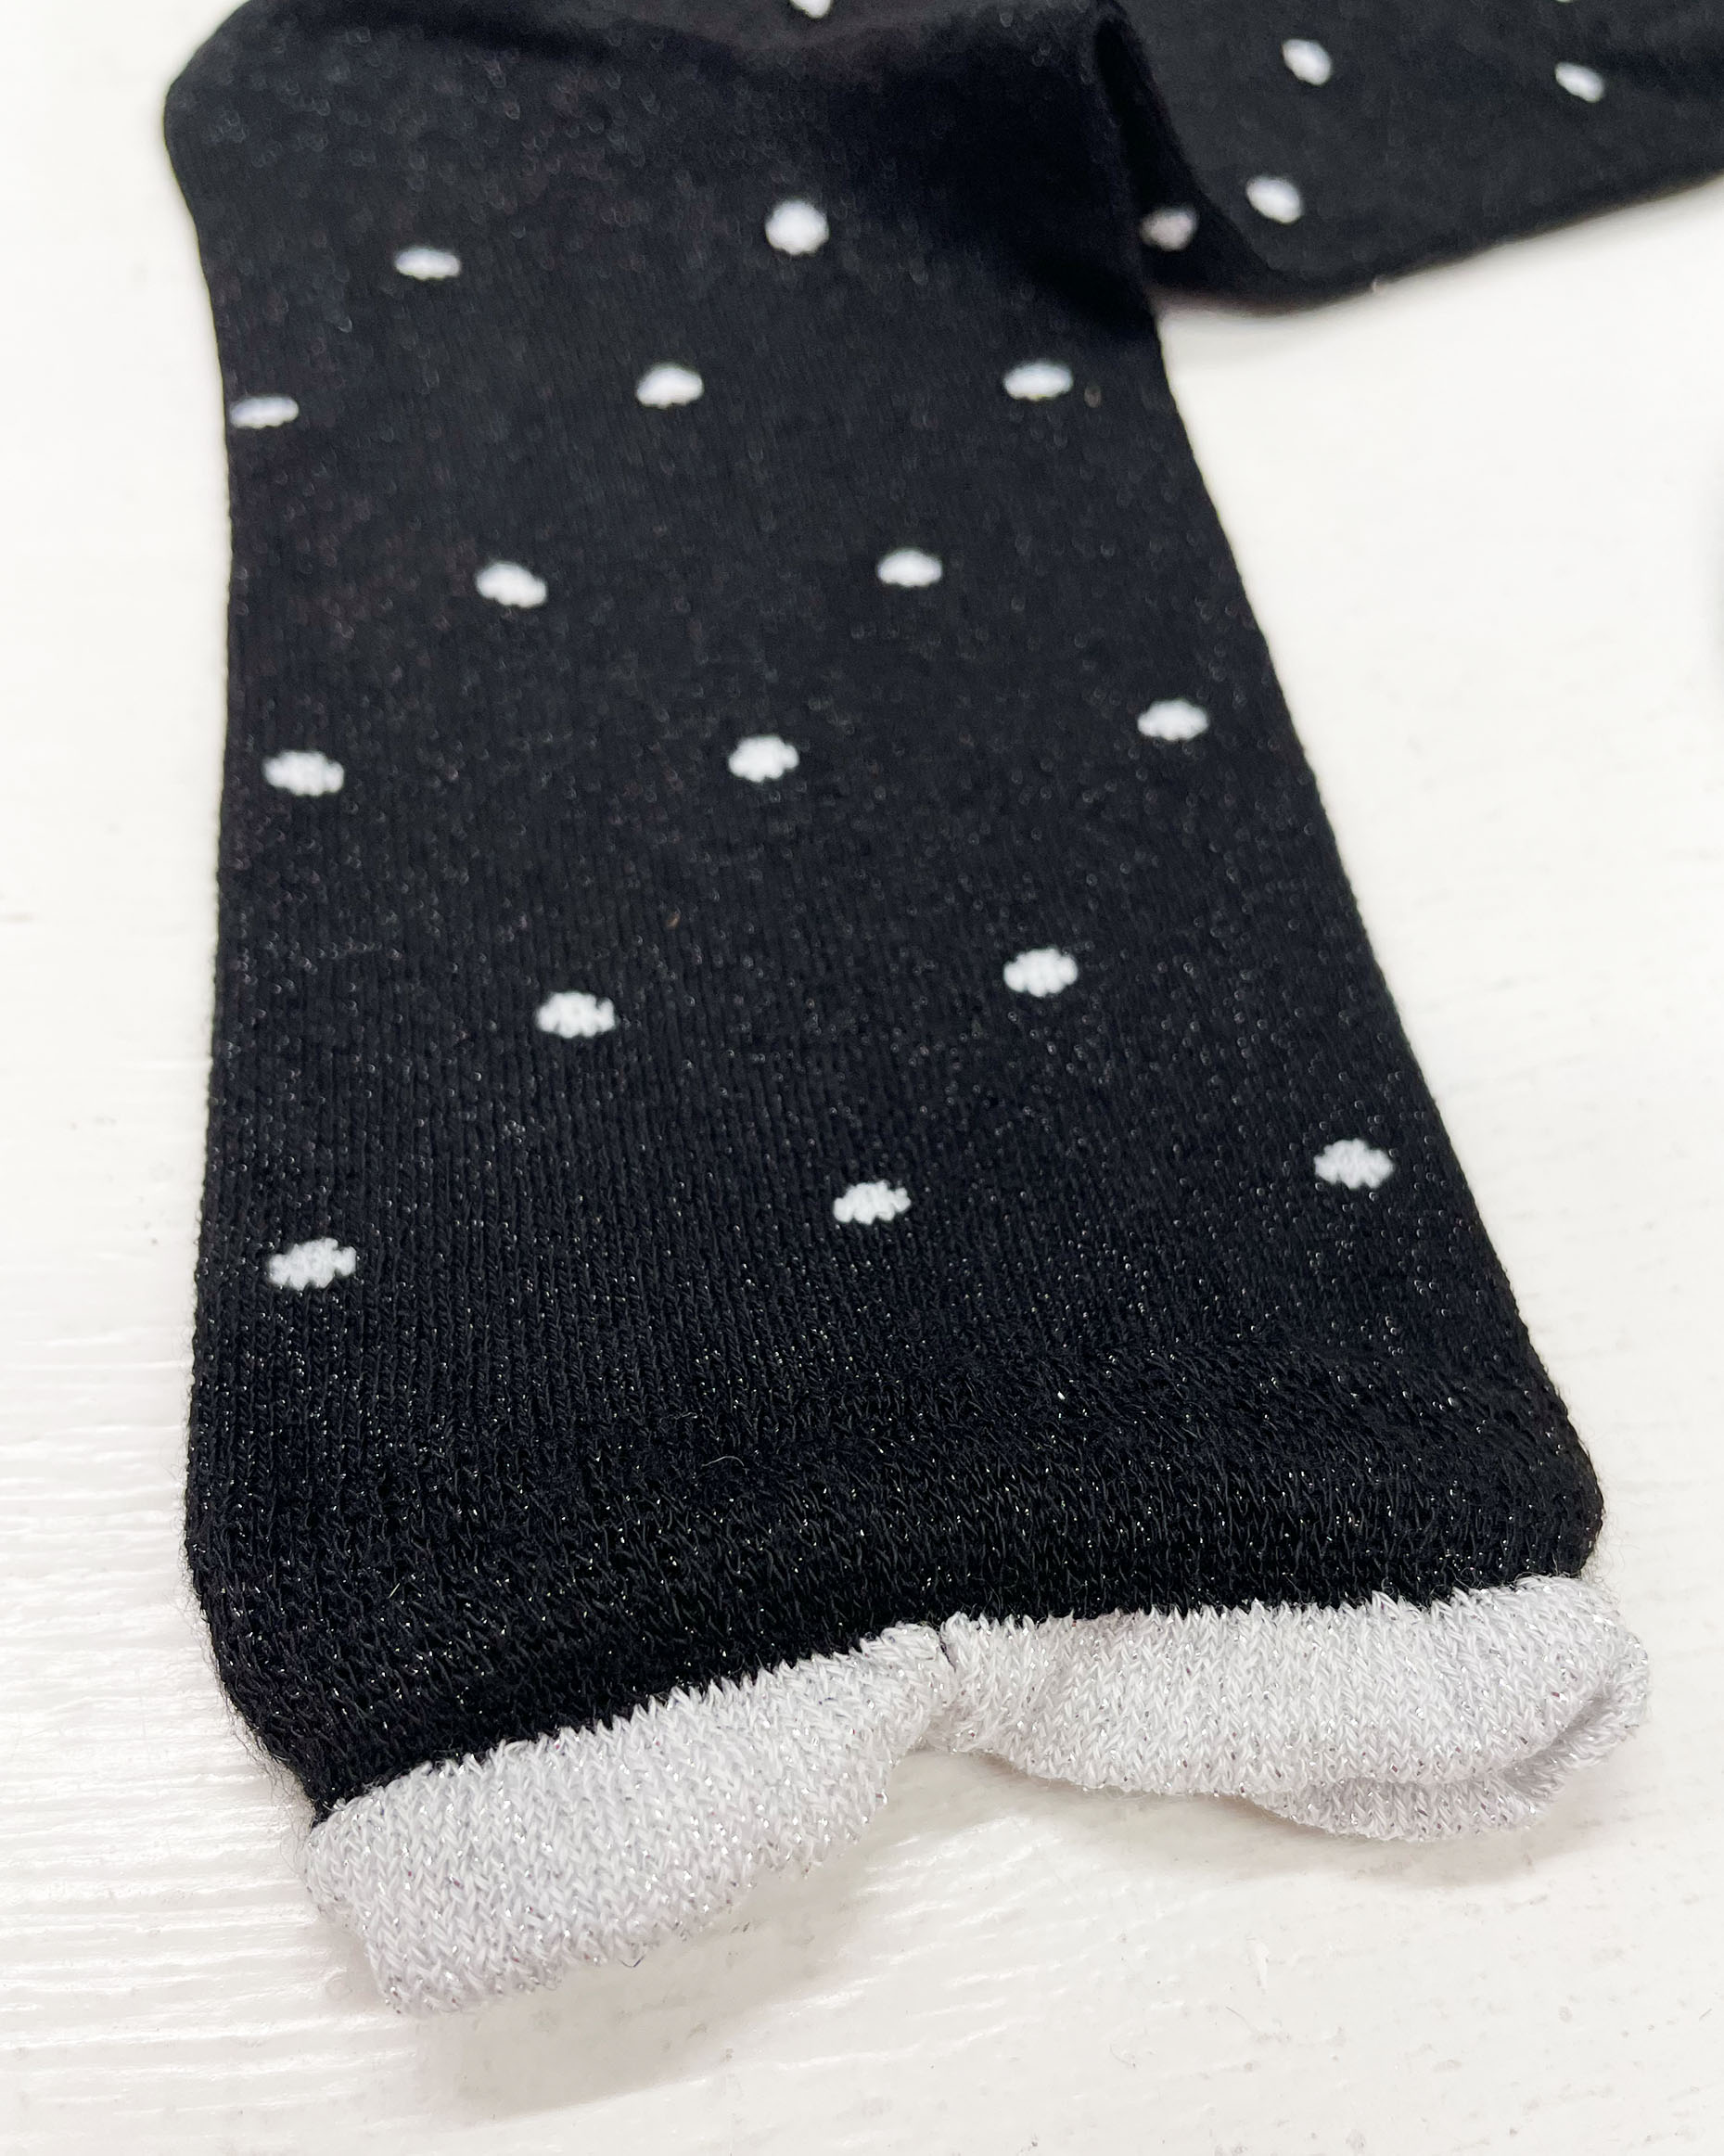 SiSi Smile Sock - Black viscose mix sparkly lamé ankle socks with an all over silver polka dot pattern, silver comfort edge with gathered stitching.